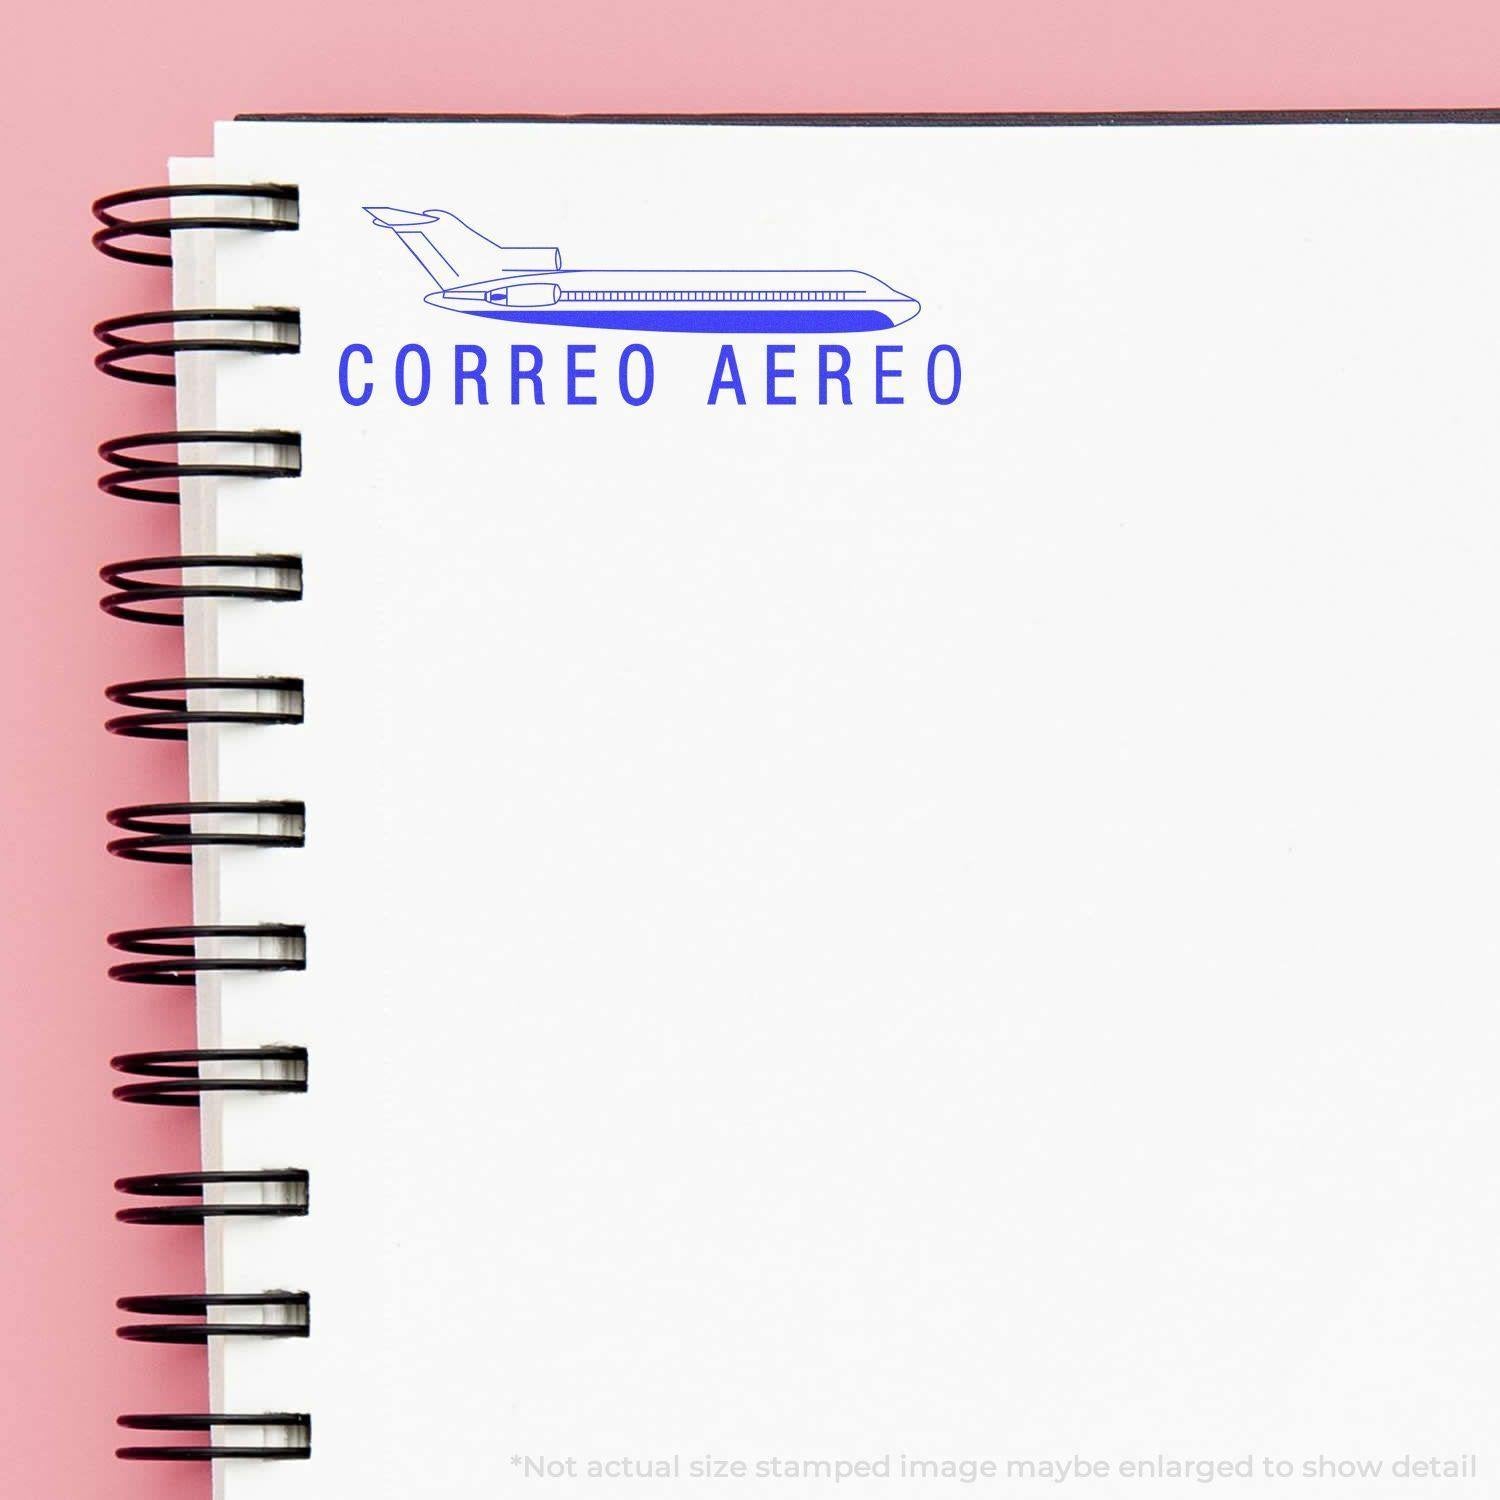 A stock office pre-inked stamp with a stamped image showing how the text "CORREO AEREO" is displayed after stamping.